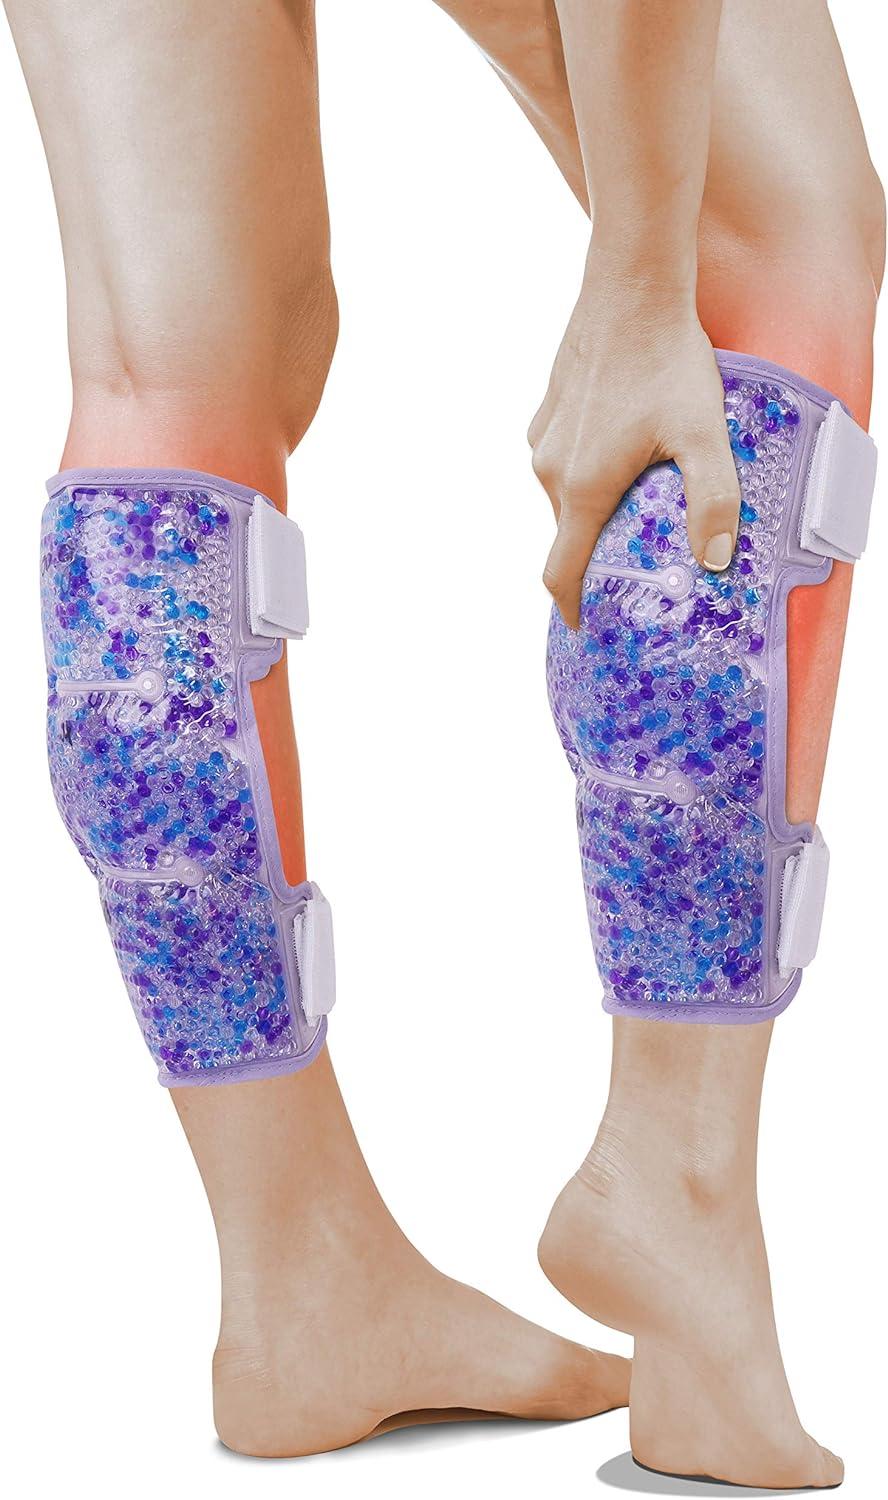 Shin Splint Ice Pack Wrap Hot Cold Compression for Pain Relief